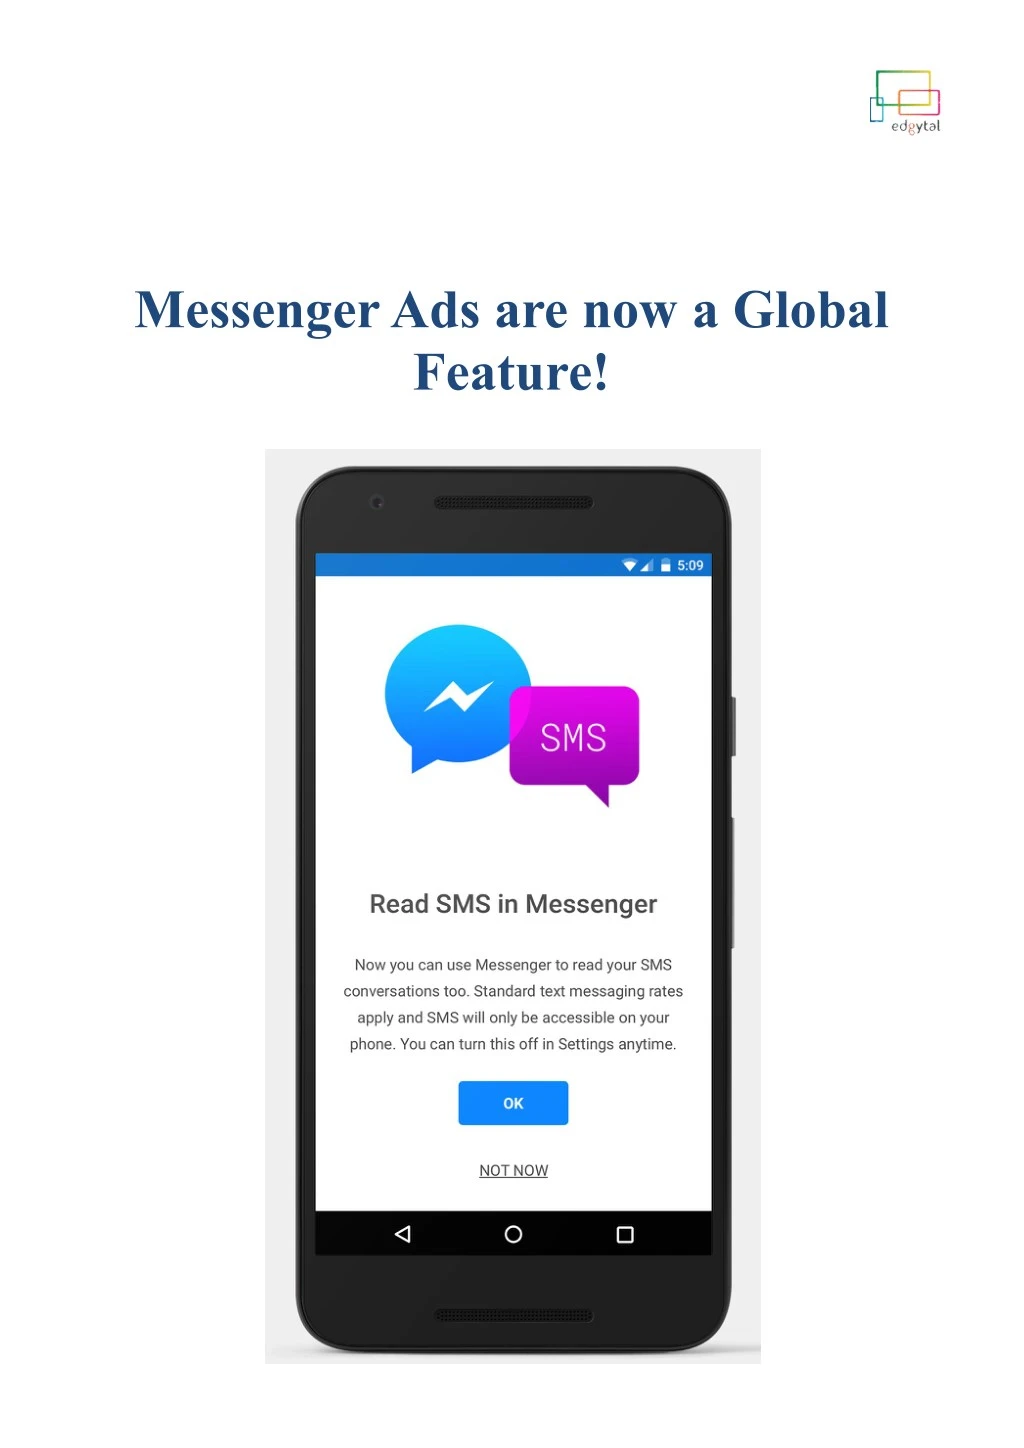 messenger ads are now a global feature